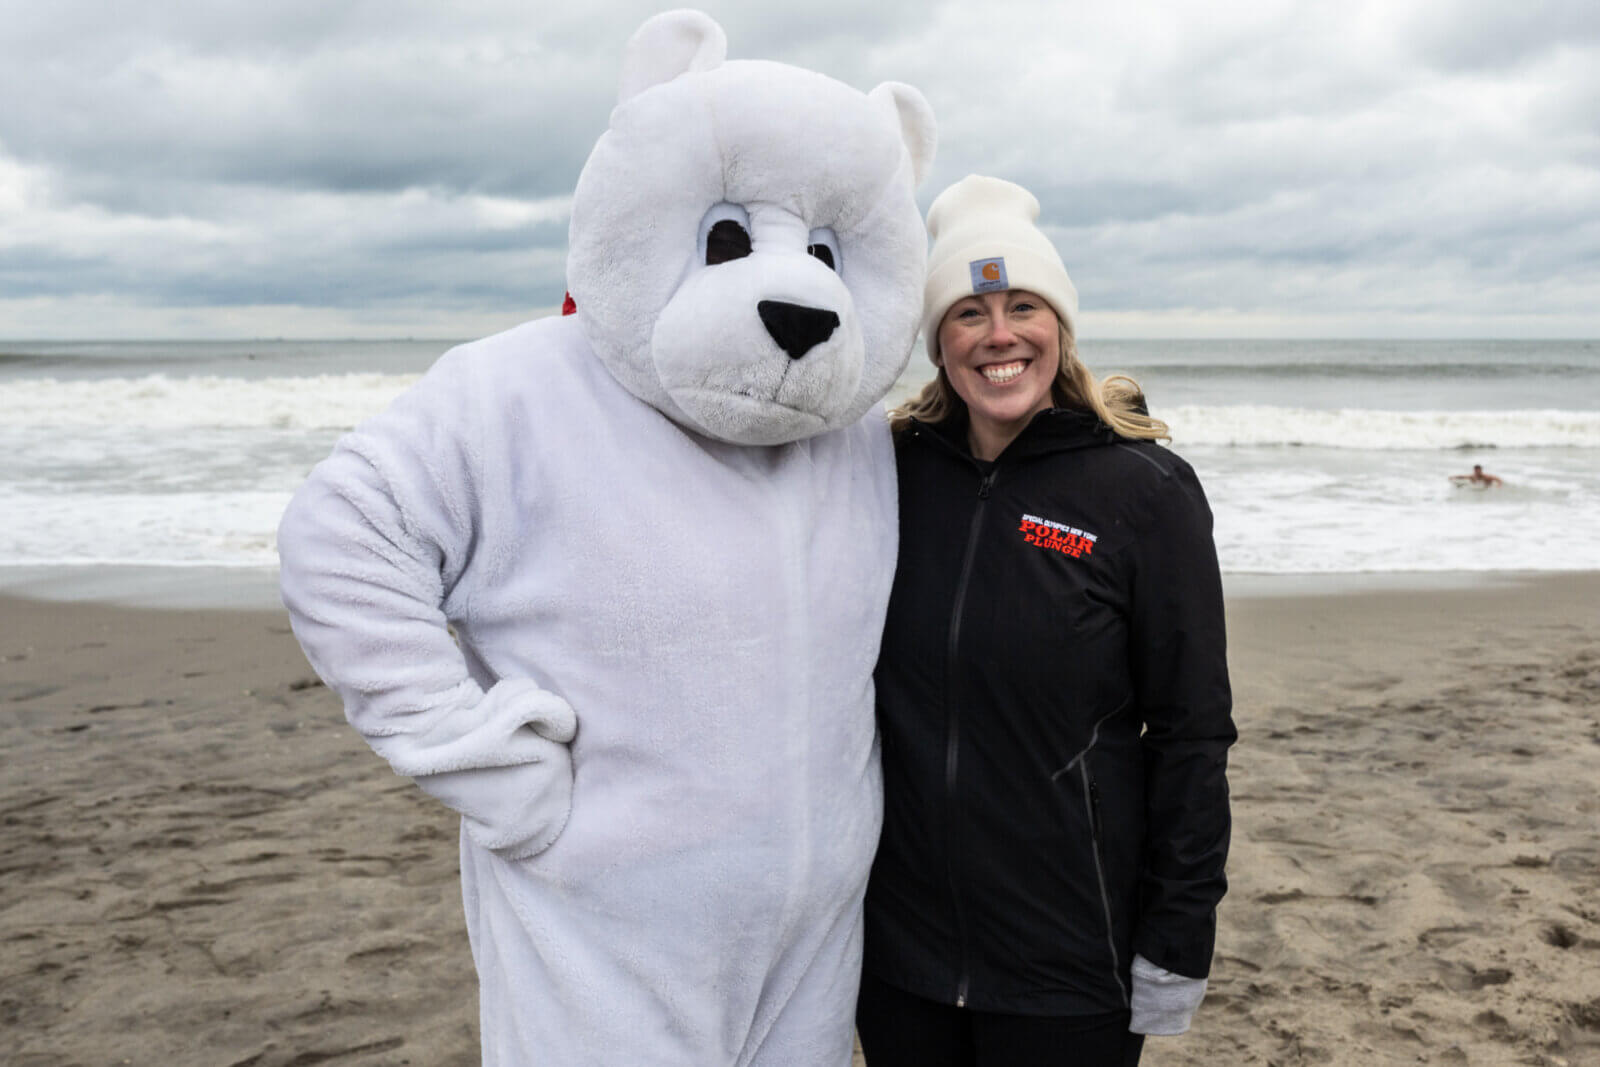 Rockaway Polar Plunge raises over 15,000 for Special Olympics